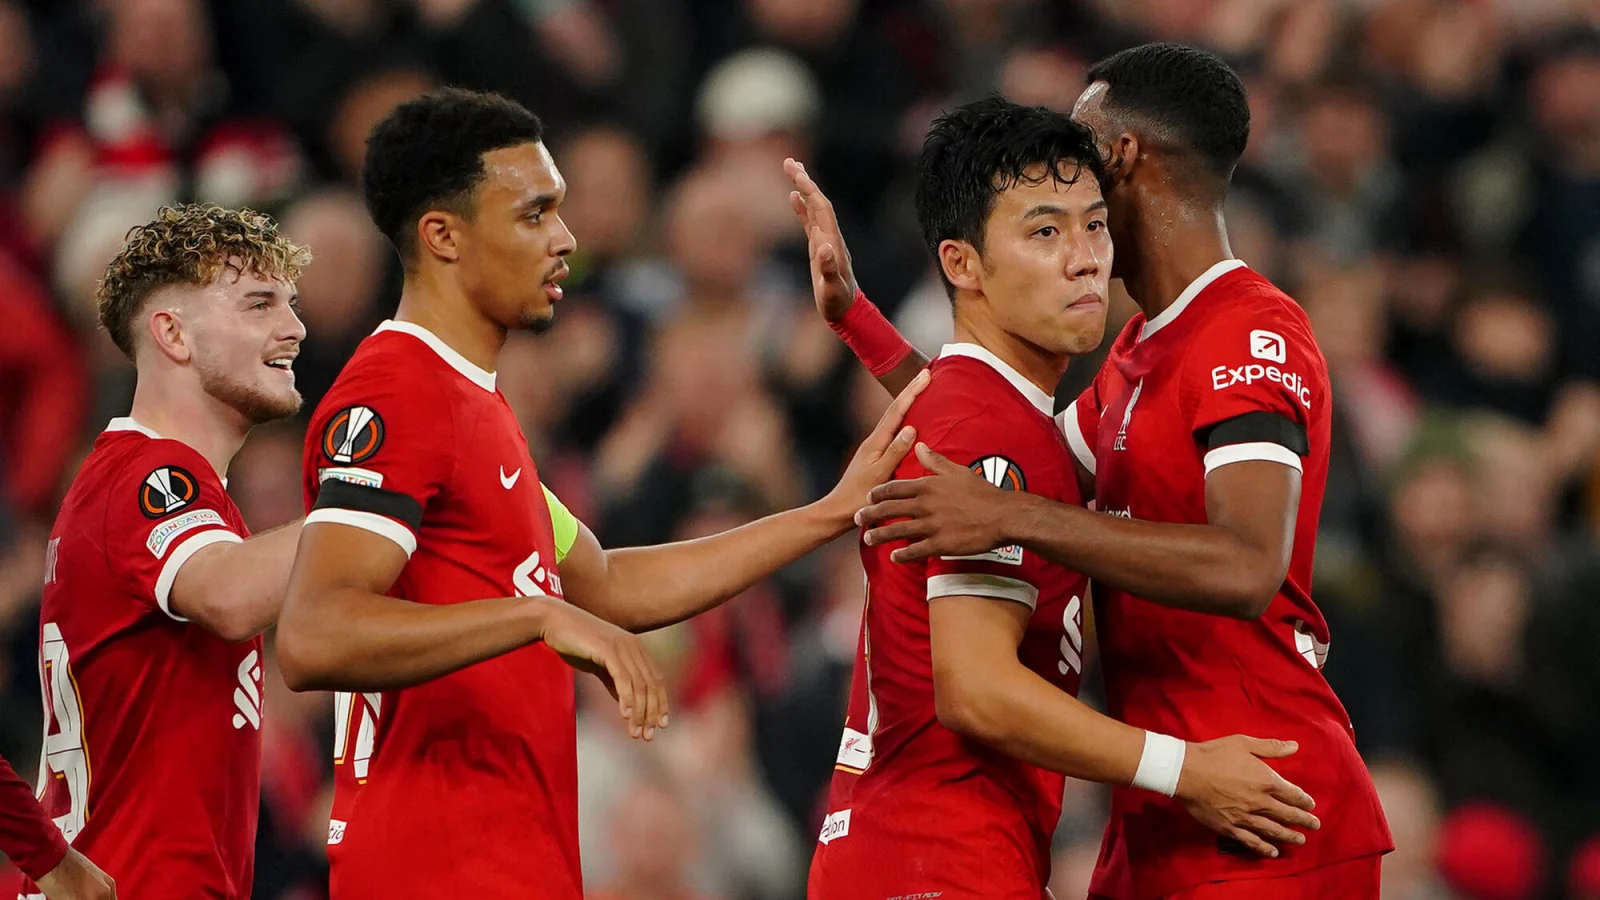 Liverpool star Wataru Endo insists his team should stay positive and move on from the disappointing draw against Manchester United.